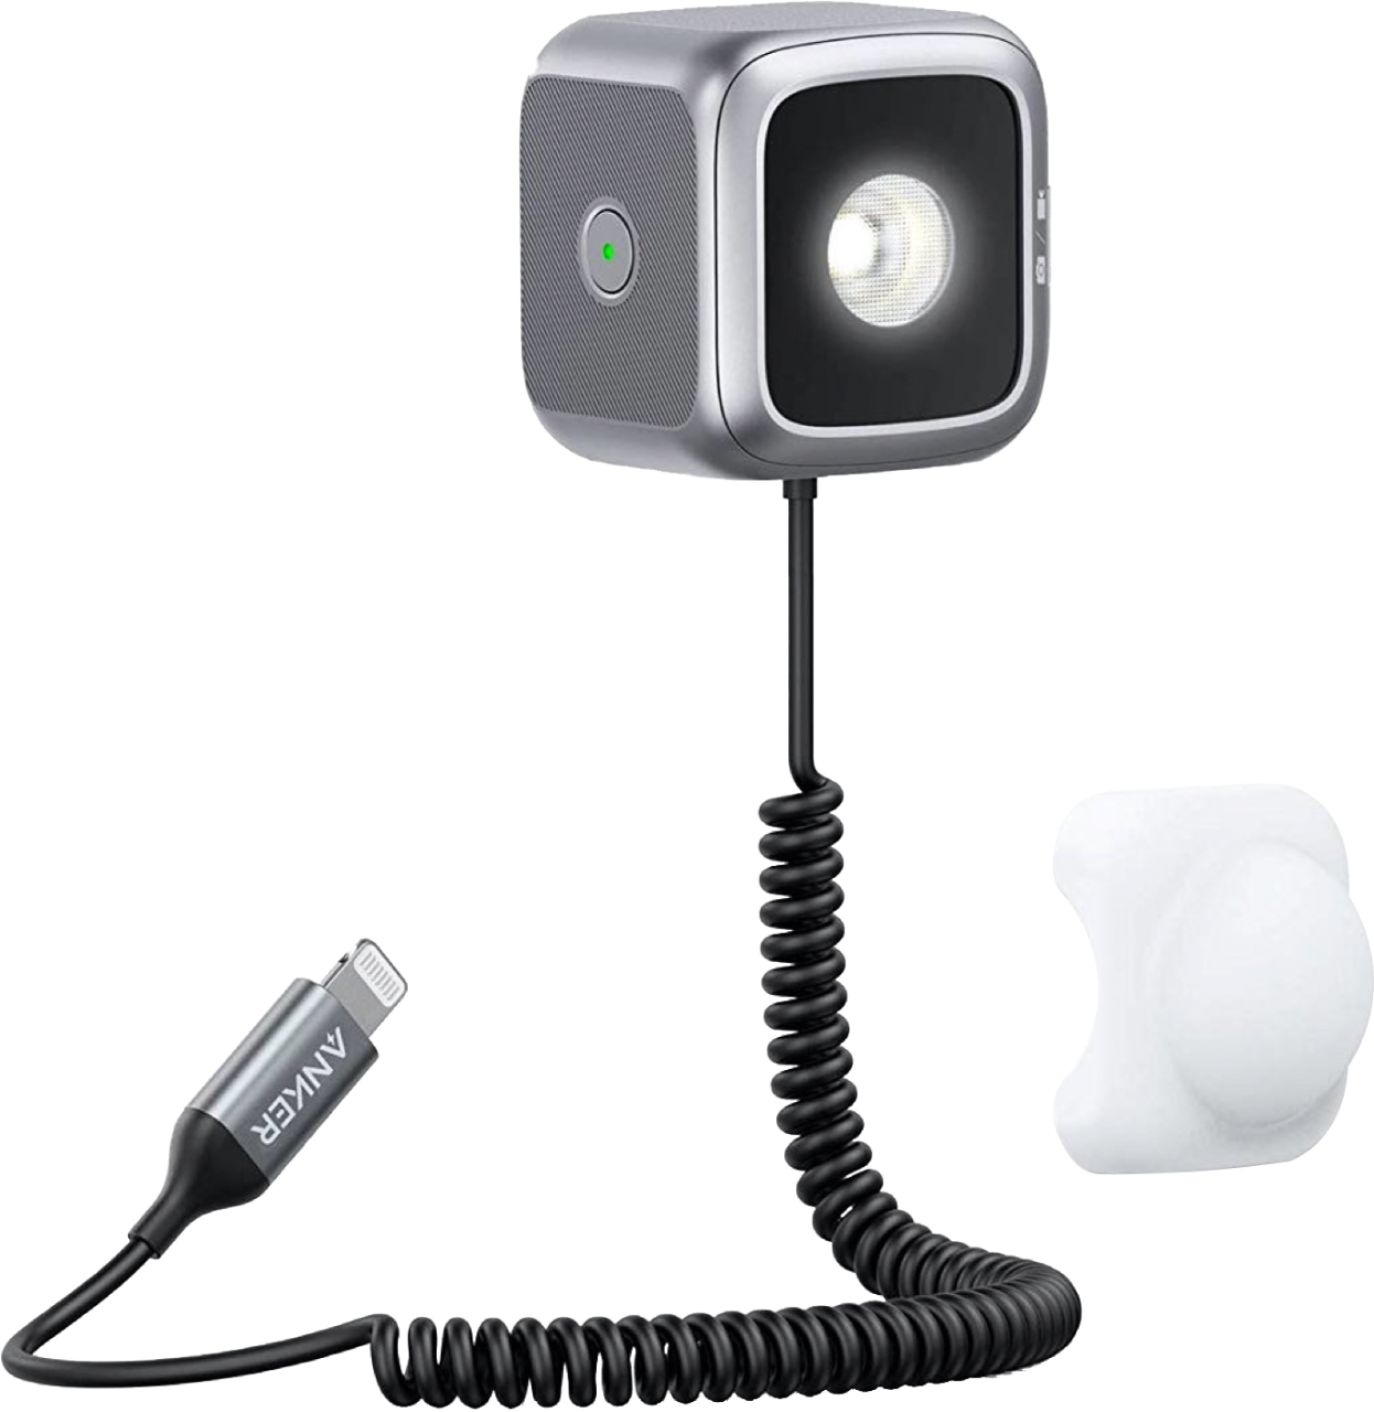 Angle View: Anker - External LED Flash for Apple iPhone 12/12 Mini/12 Pro/11 Pro Max and iPhone 11/11 Pro/11 Pro Max